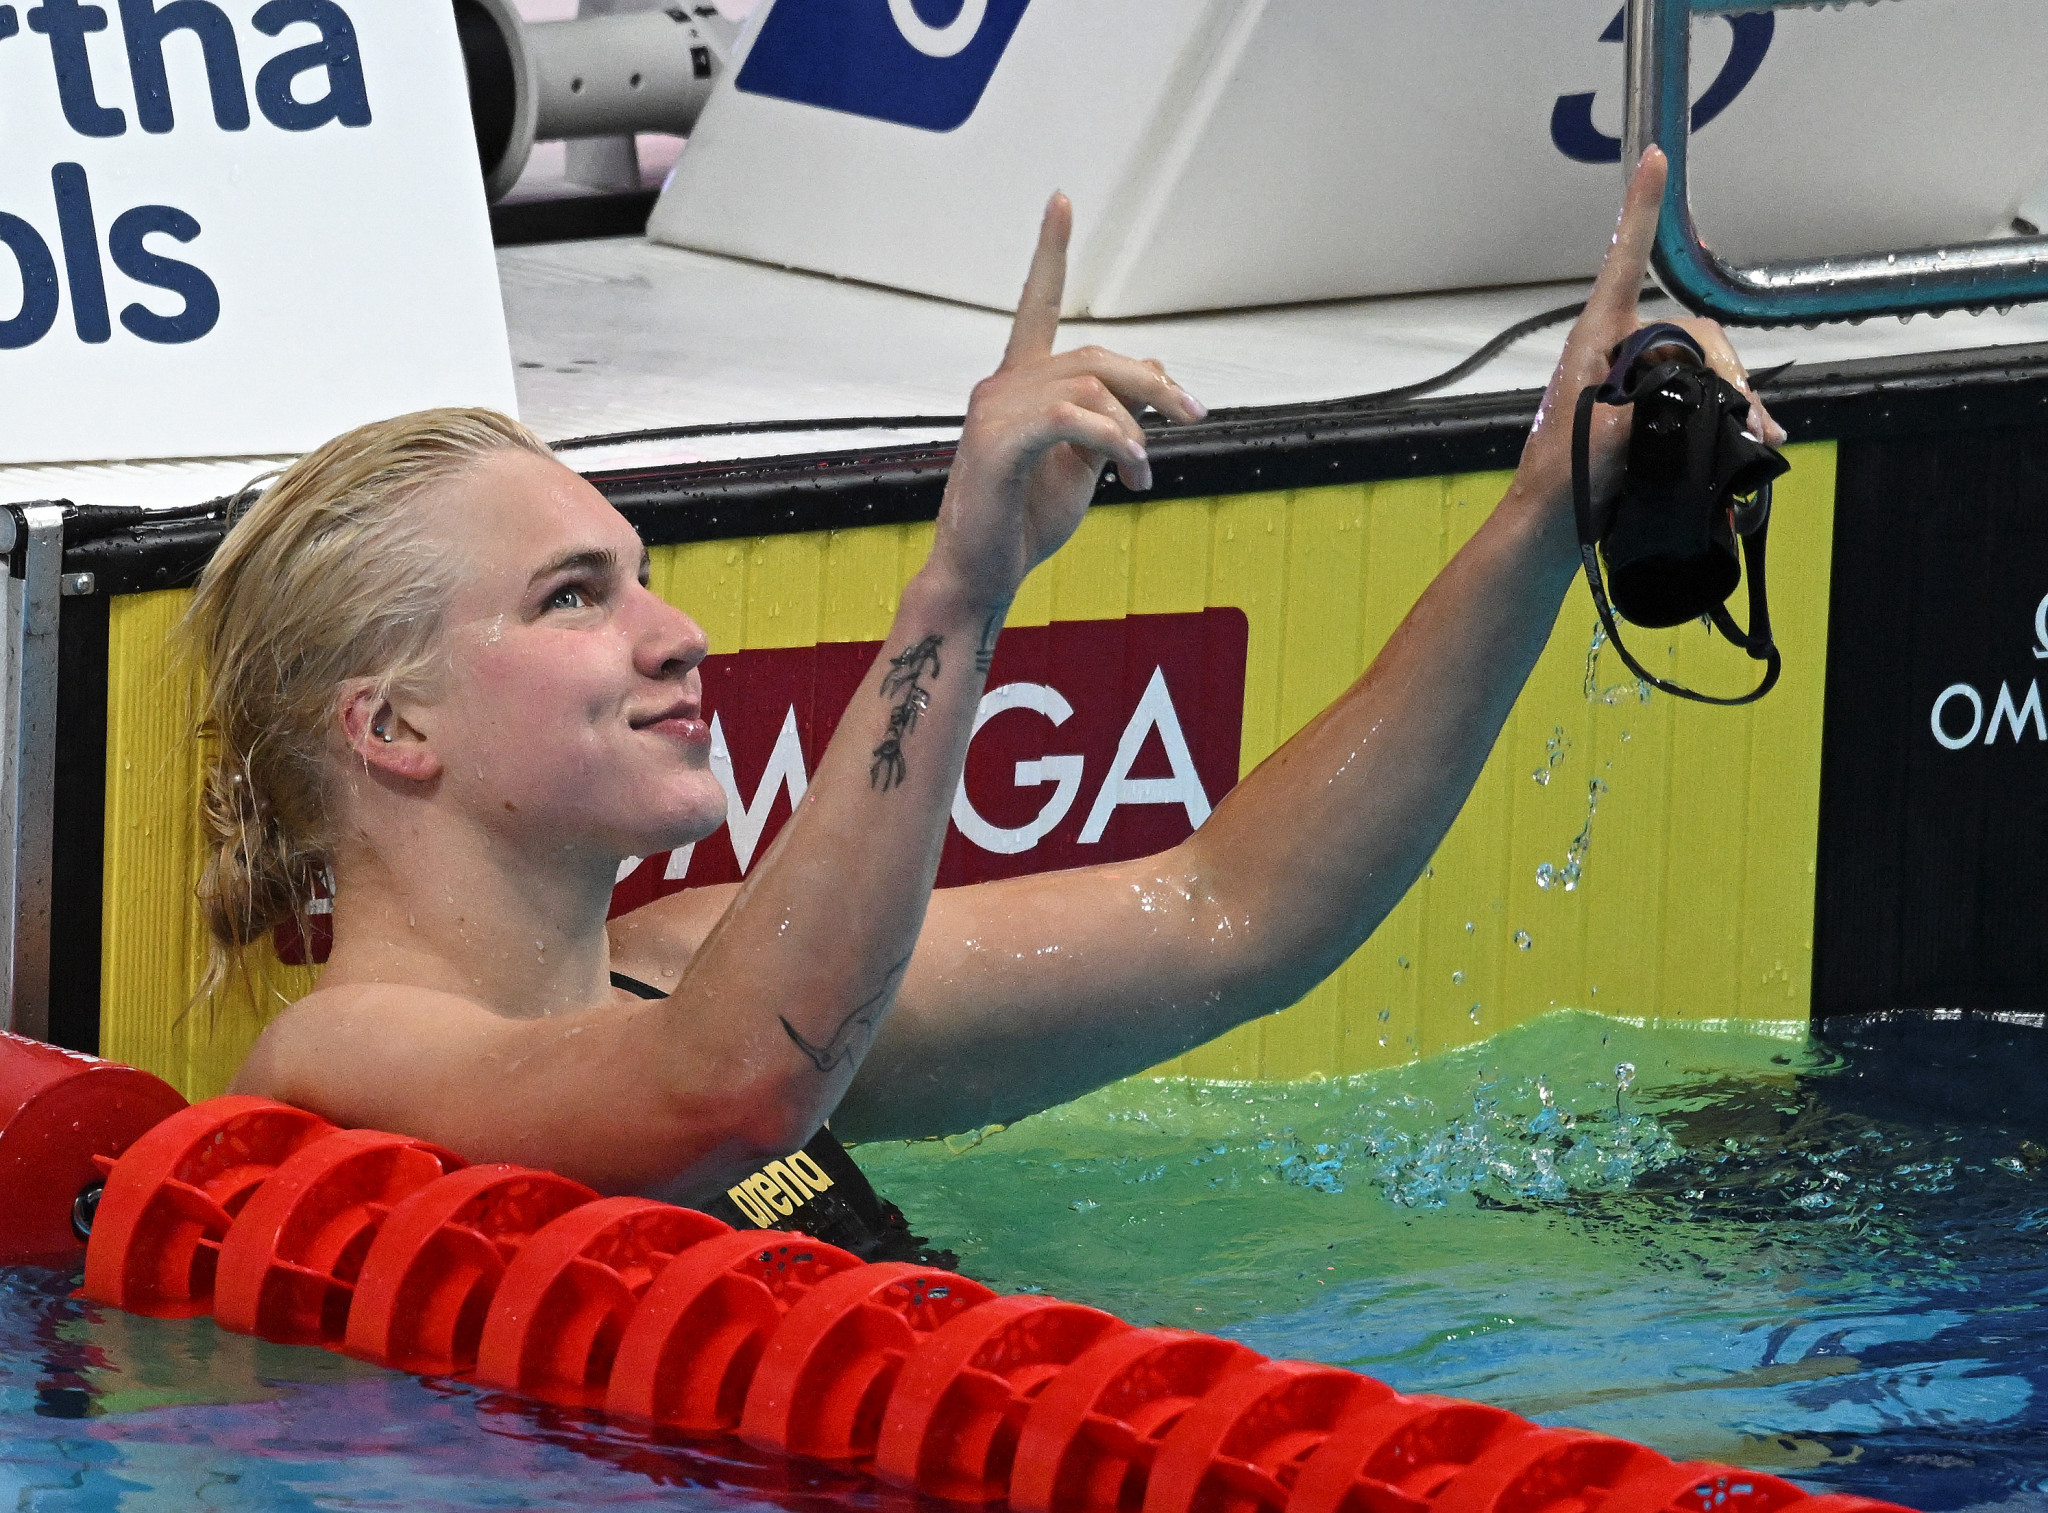 Victory for Rūta Meilutytė of Lithuania in the women's 50m freestyle final provided her with a second gold medal at the FINA World Championships, nine years after her first ©Getty Images